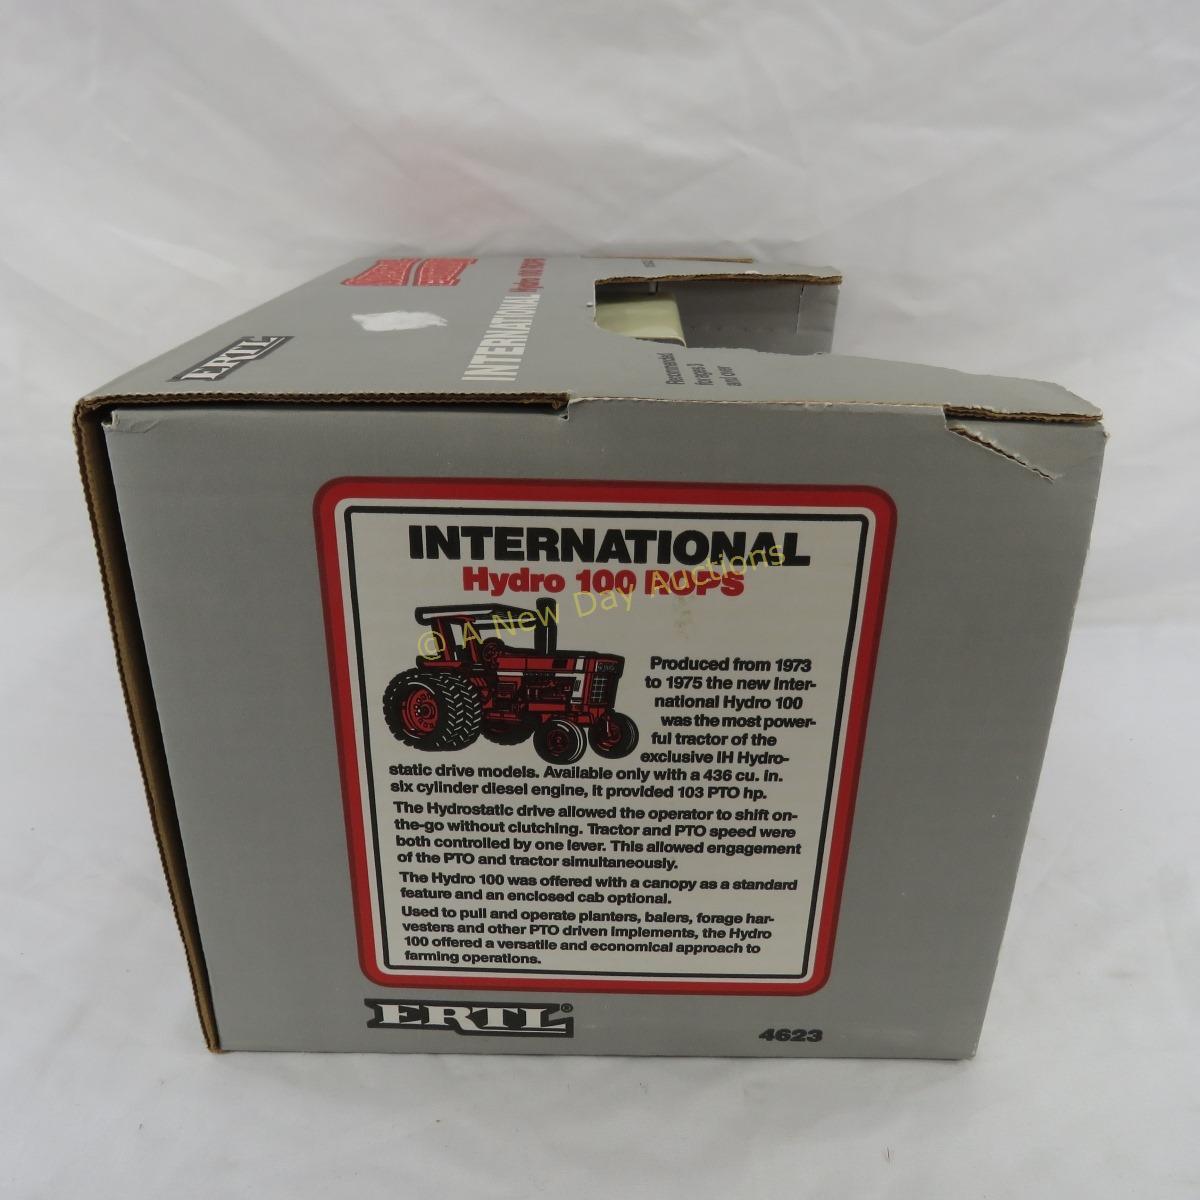 Ertl Int'l Hydro 100 ROPS special edition #4623